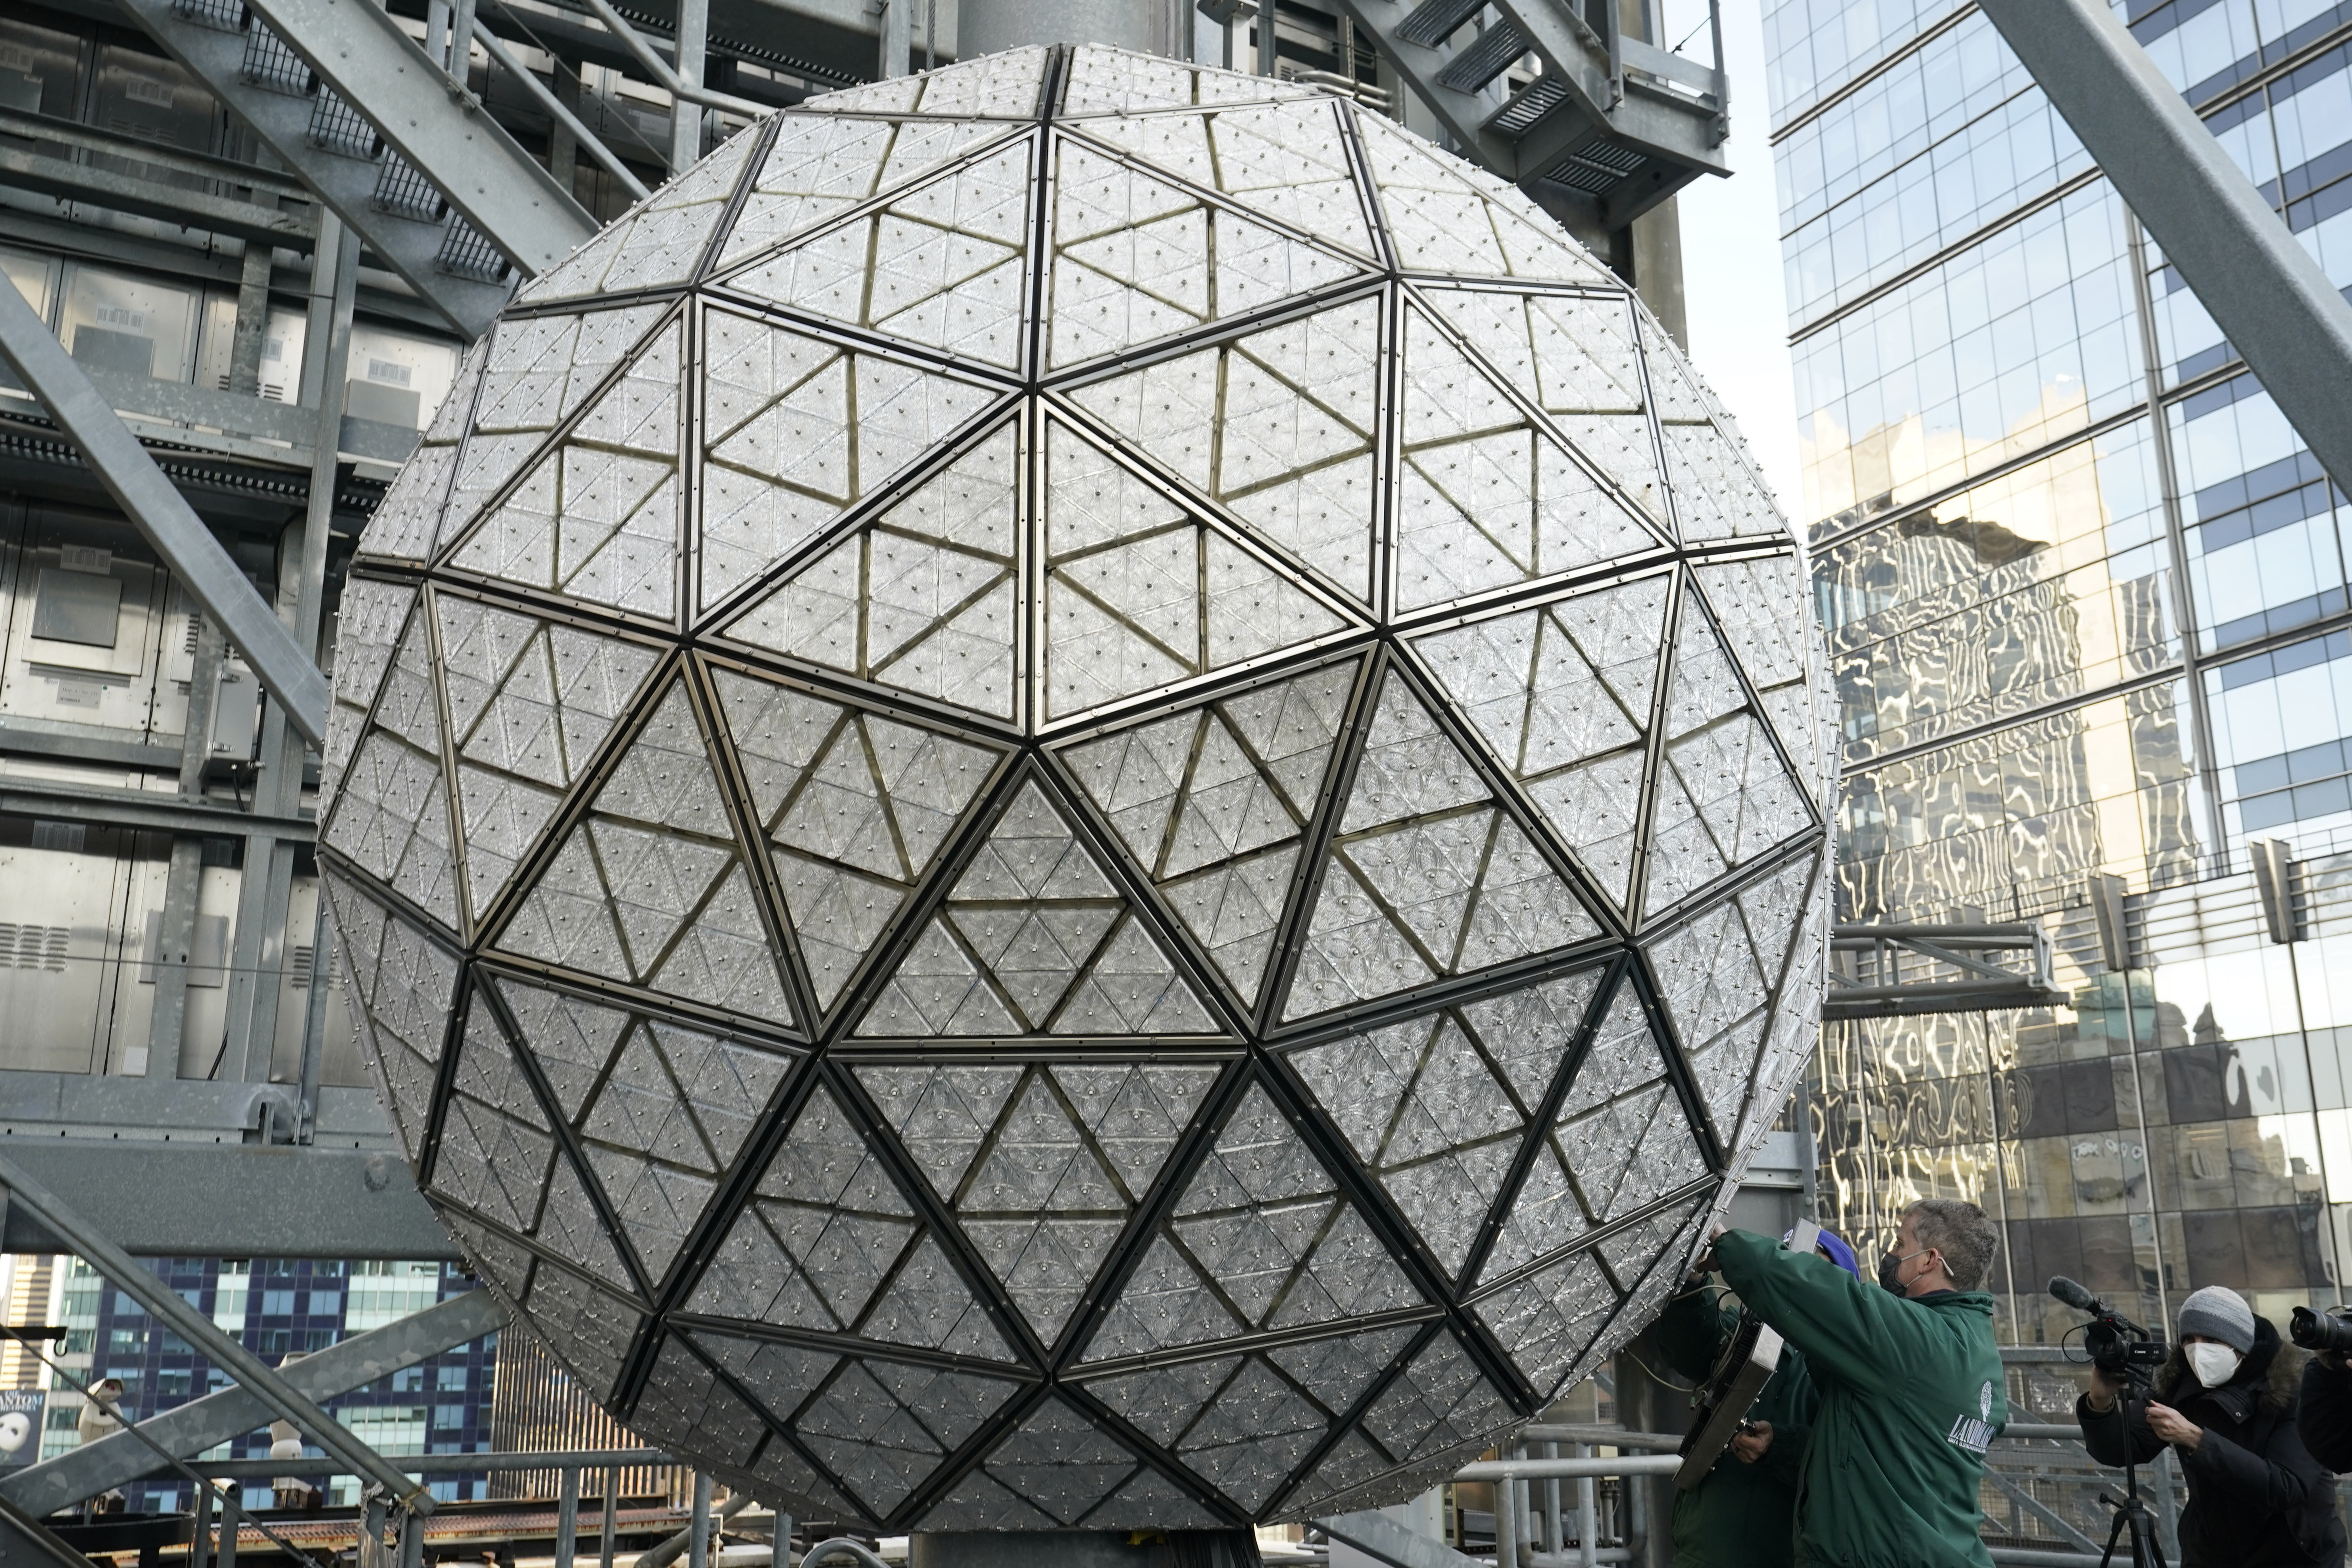 LIVE STREAM 2021 New Years Eve Times Square Ball Drop virtual event